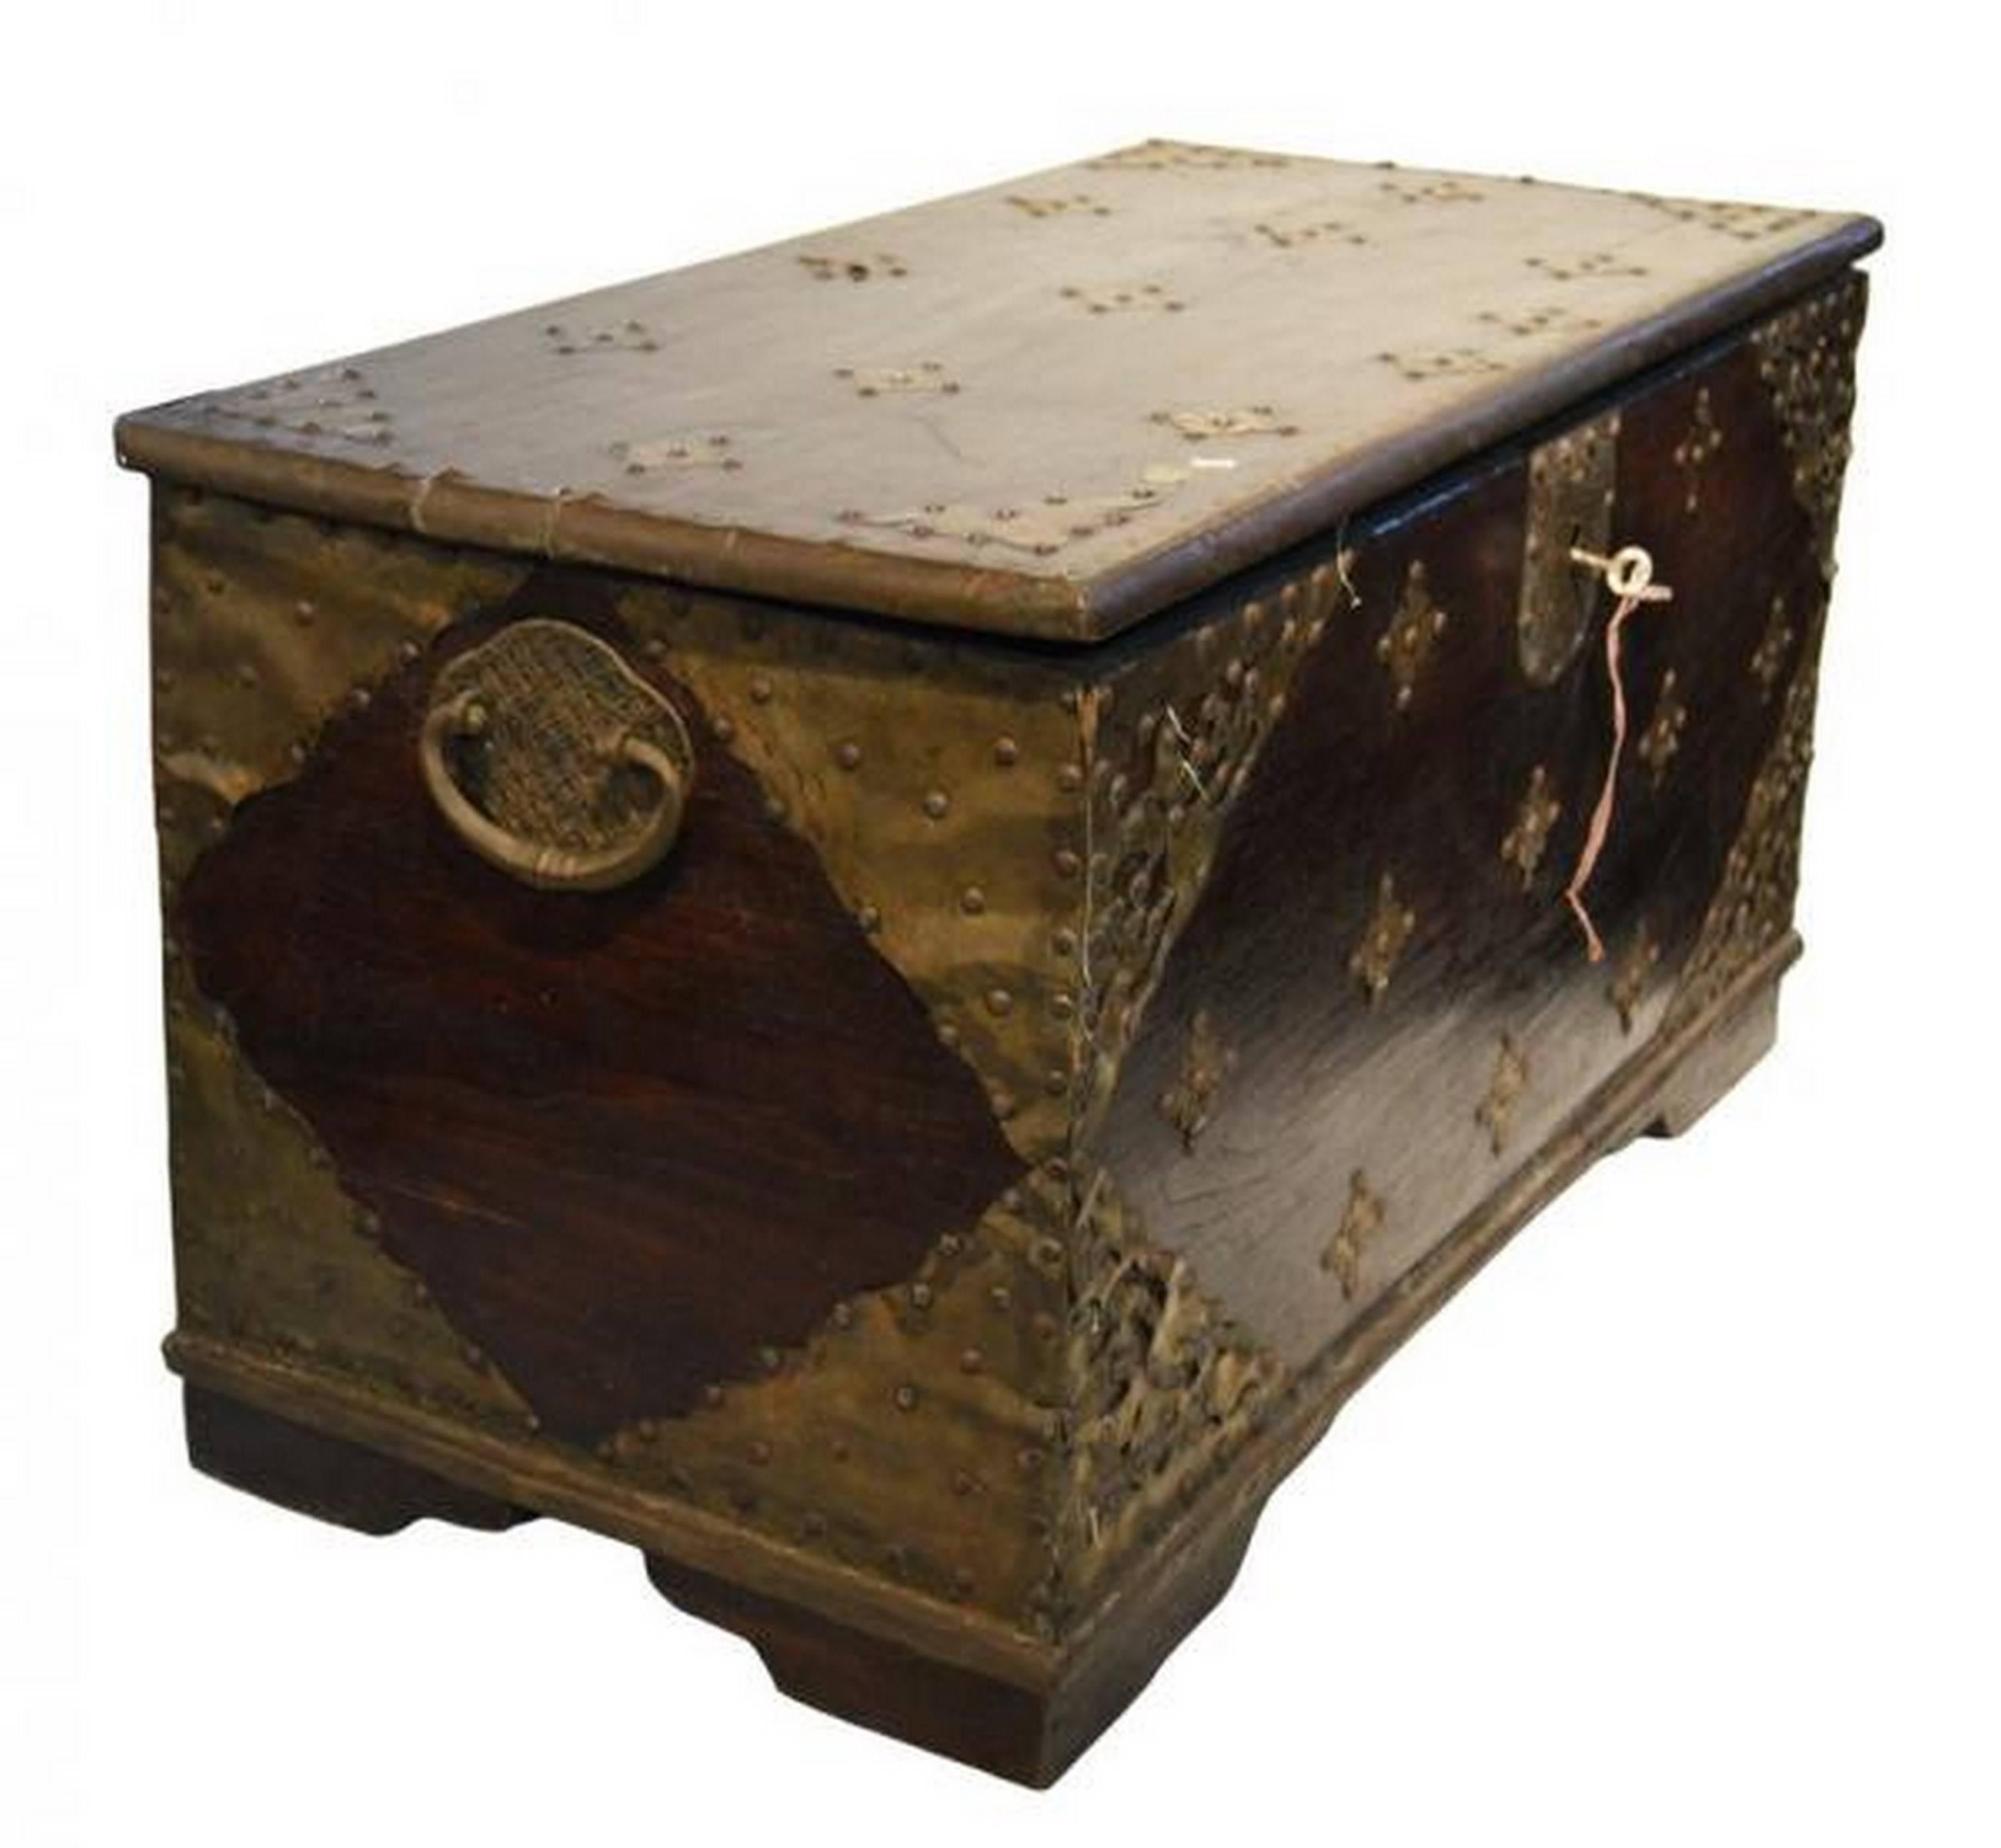 Antique Indonesian Madura chest with original traditional ornate hardware, hinged top, lateral brass handles.